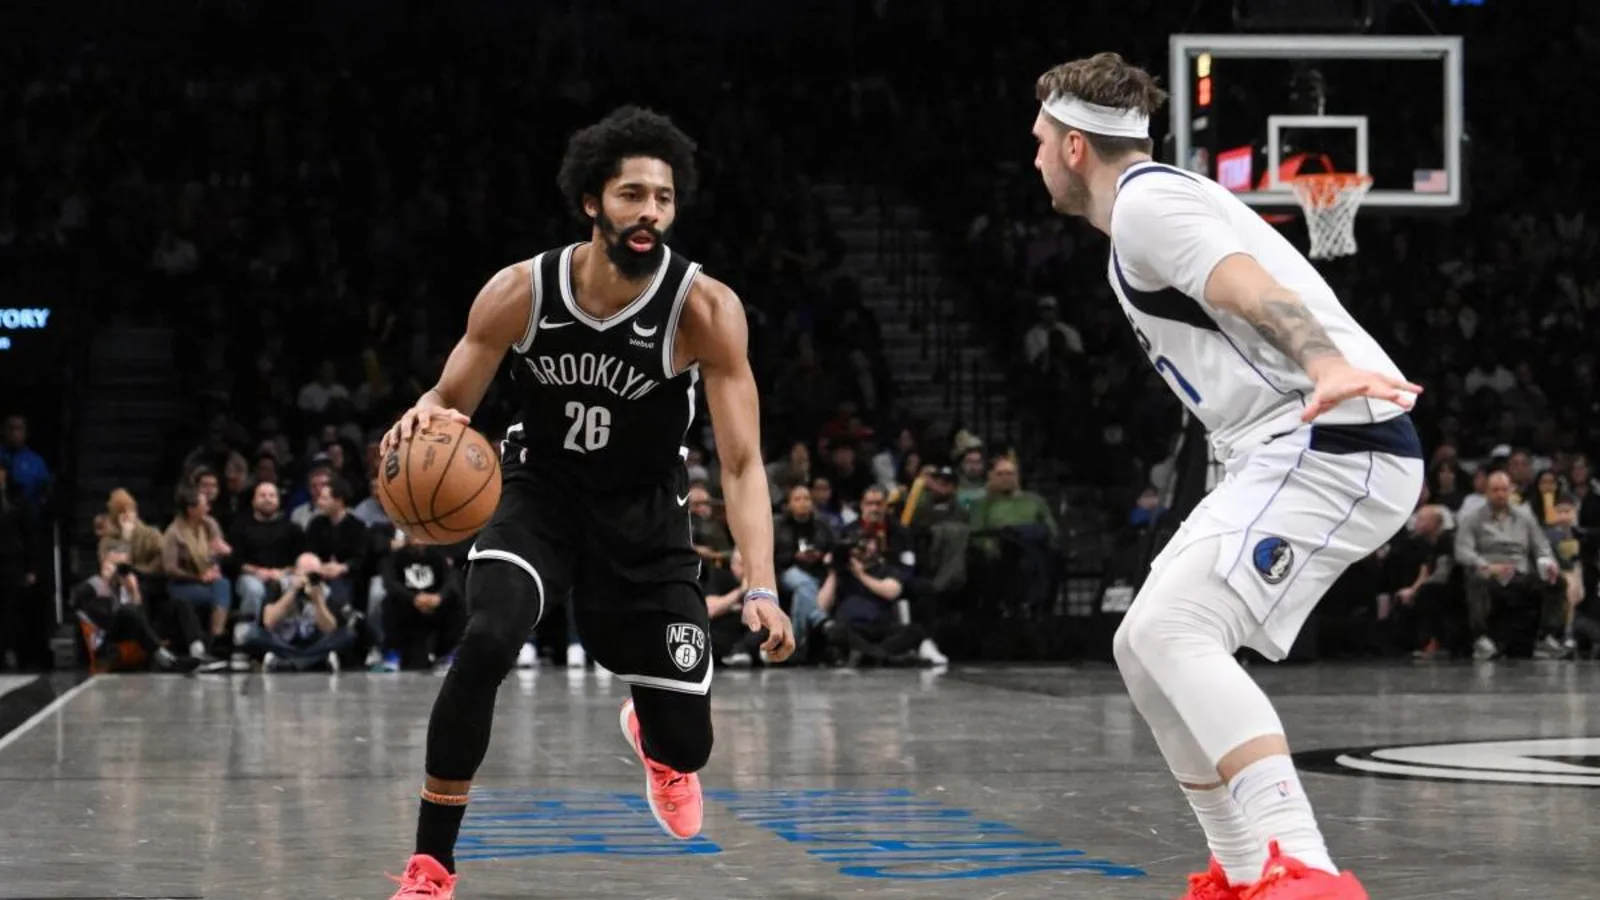 Spencer Dinwiddie Joins Lakers: A Game-Changing Move for LA's Quest for Glory